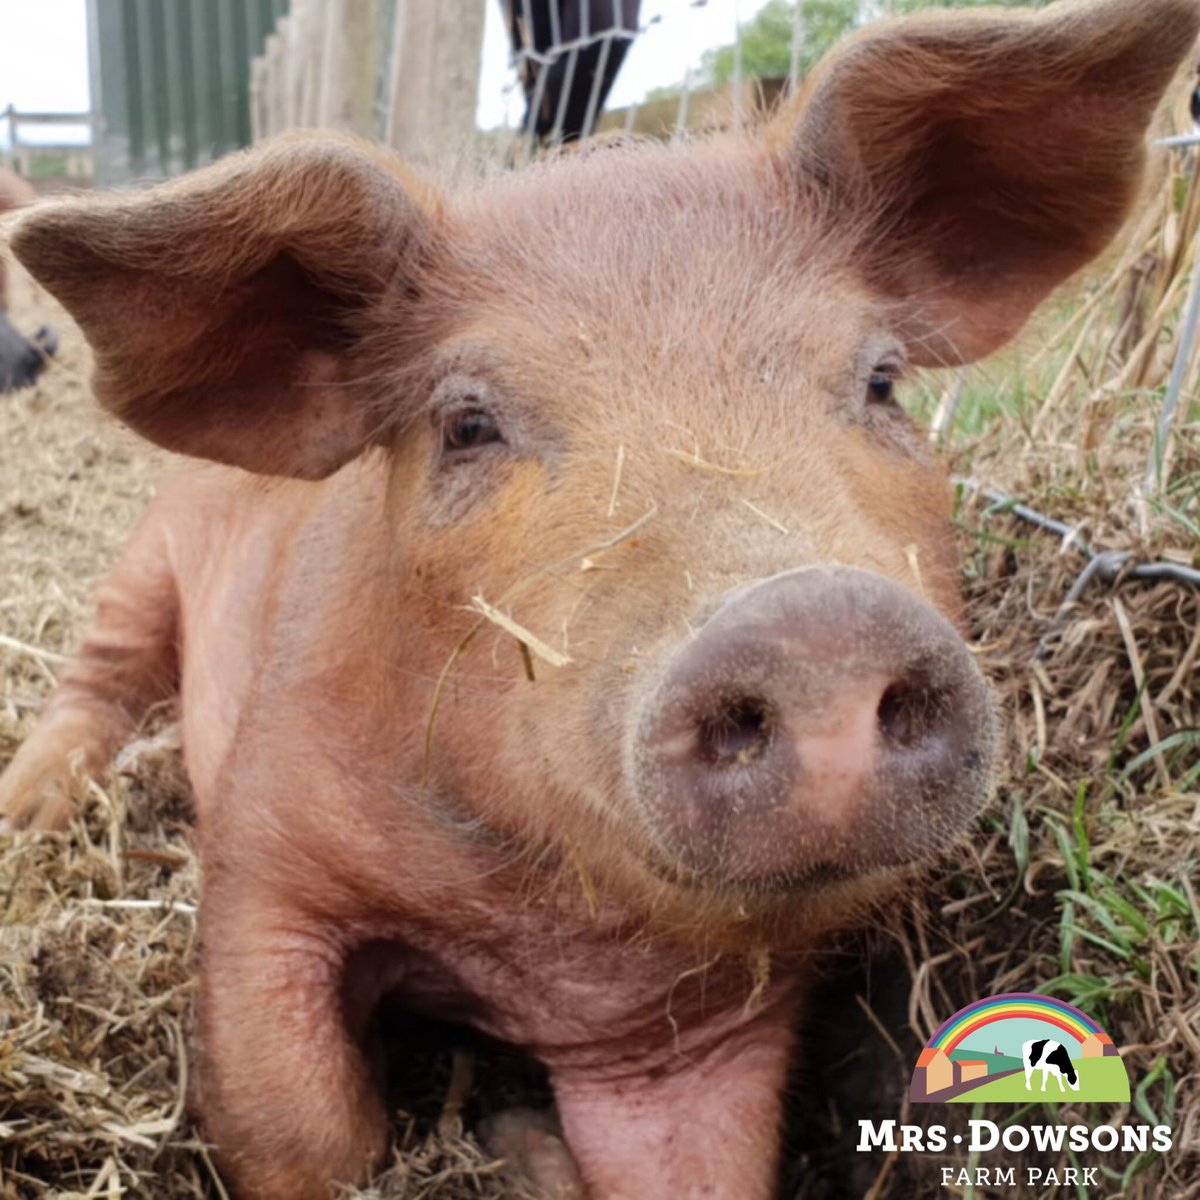 Our piglets are growing quick! 🐽💕
Come and see them before the summer holidays are over! #summerholidays #lancashire #dayoutwithkids #piglets